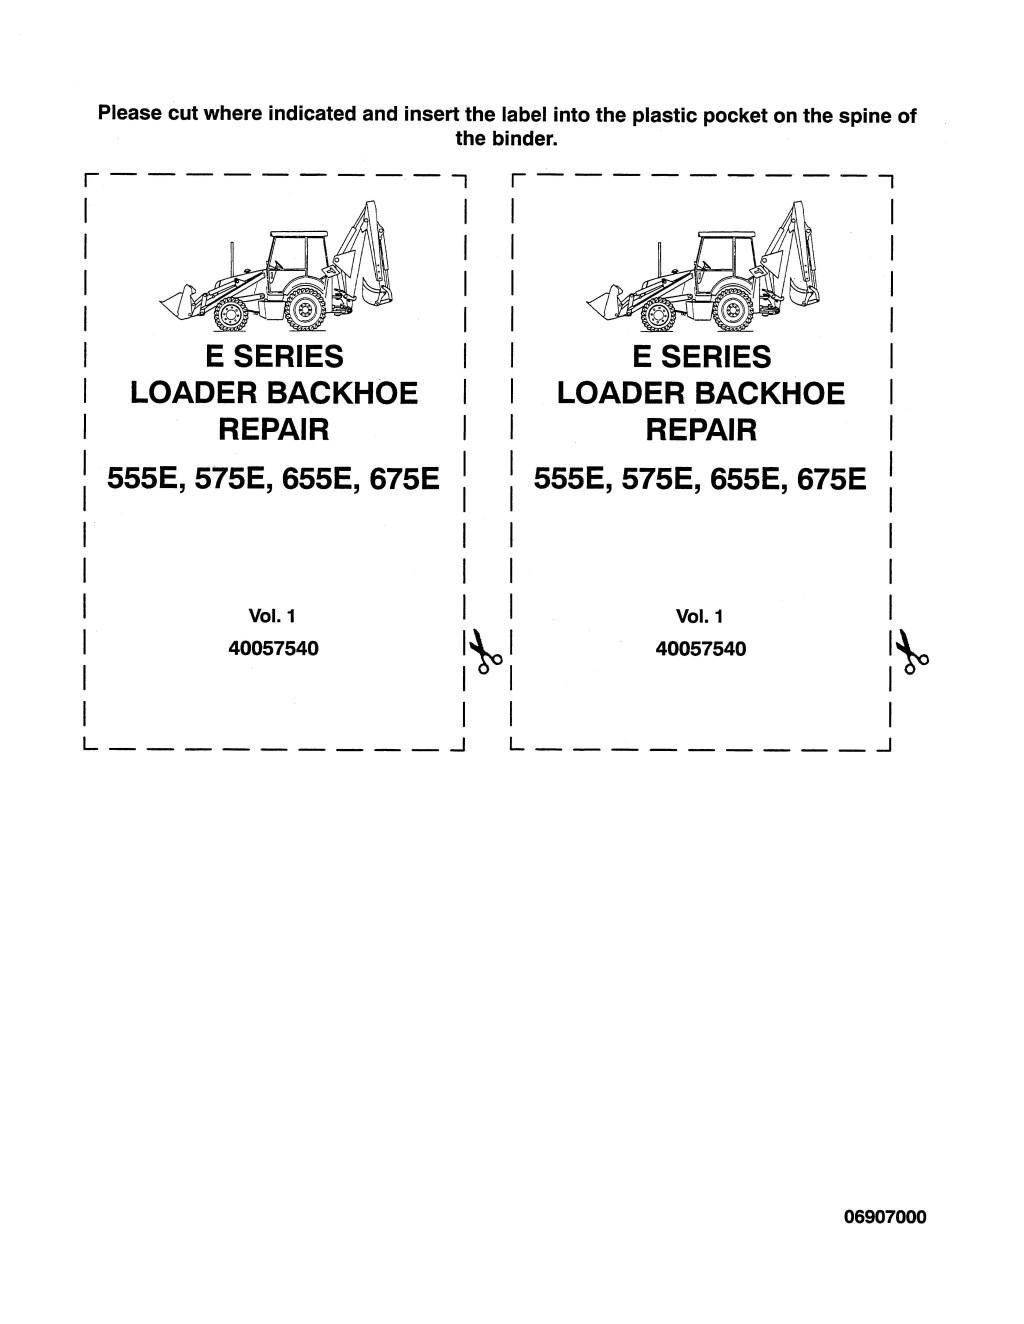 Picture of: Ford E Loader Backhoe Service Repair Manual Instant Download by